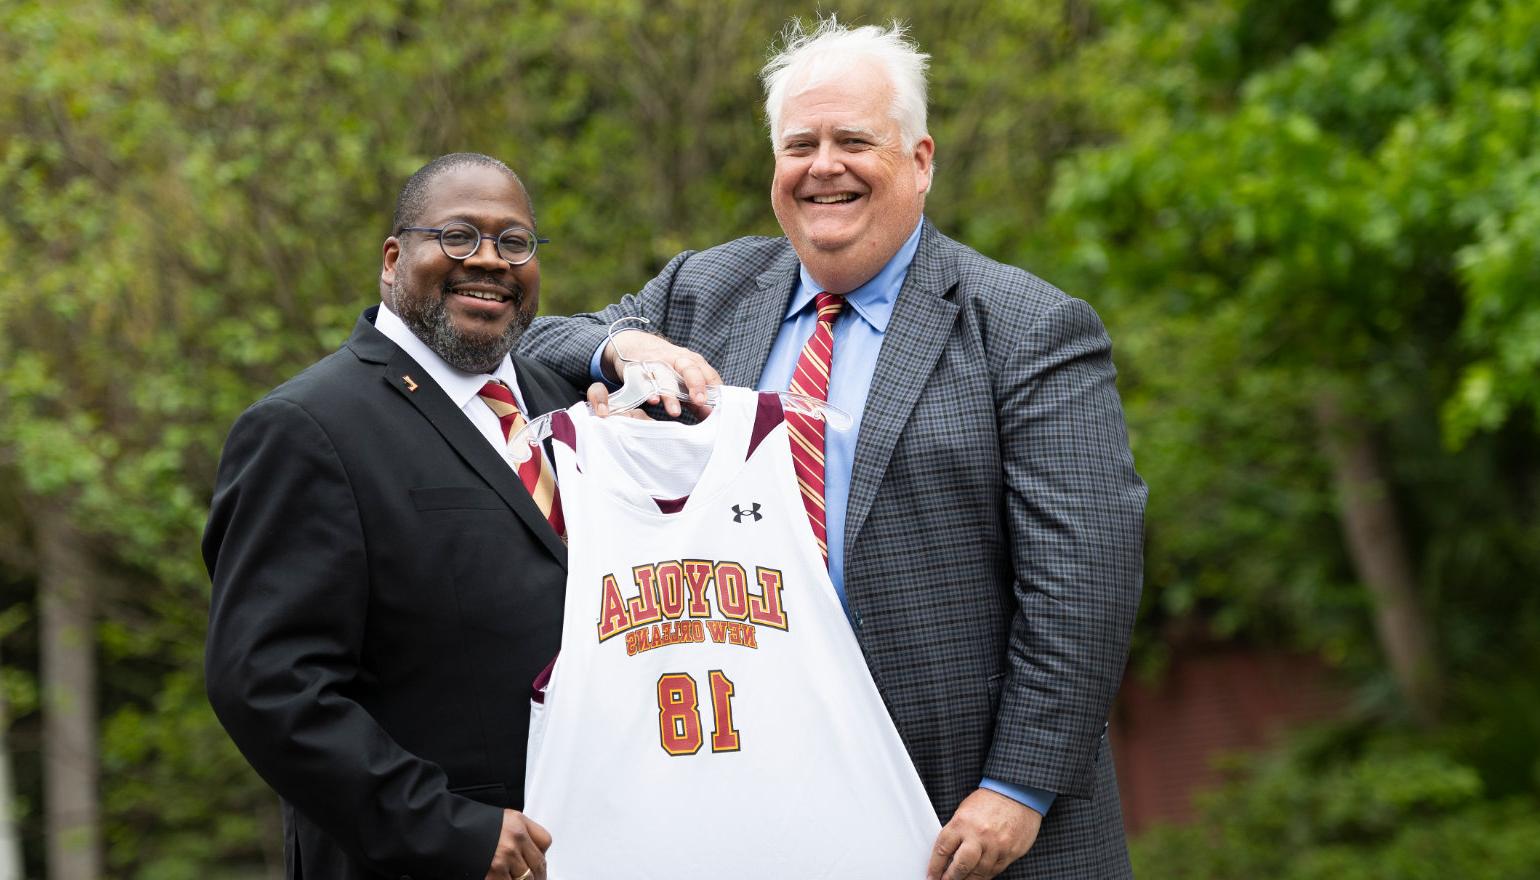 Stephen Landry '83, chair of the 校董会, presents Dr. Xavier Cole with a #18 basketball jersey